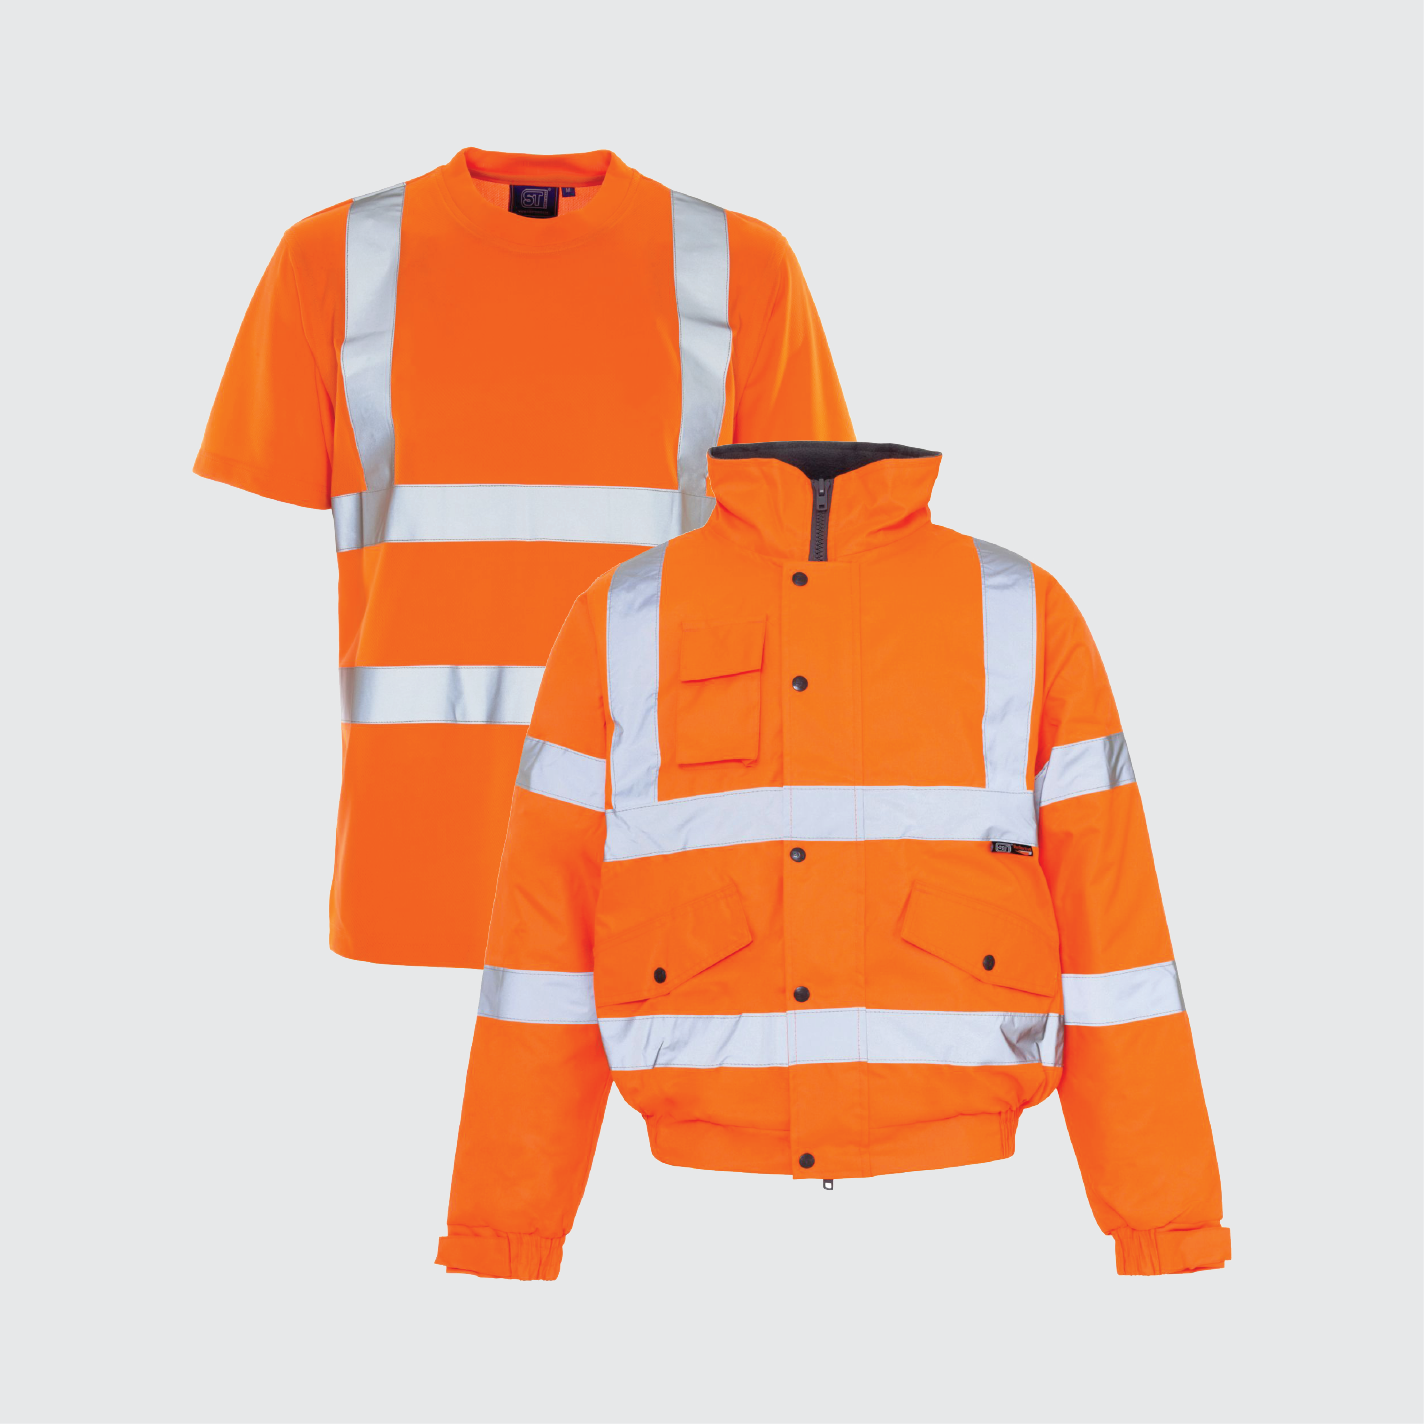 8+4 Hi Vis T-shirt and Bomber Jackets - FREE LOGO & DELIVERY